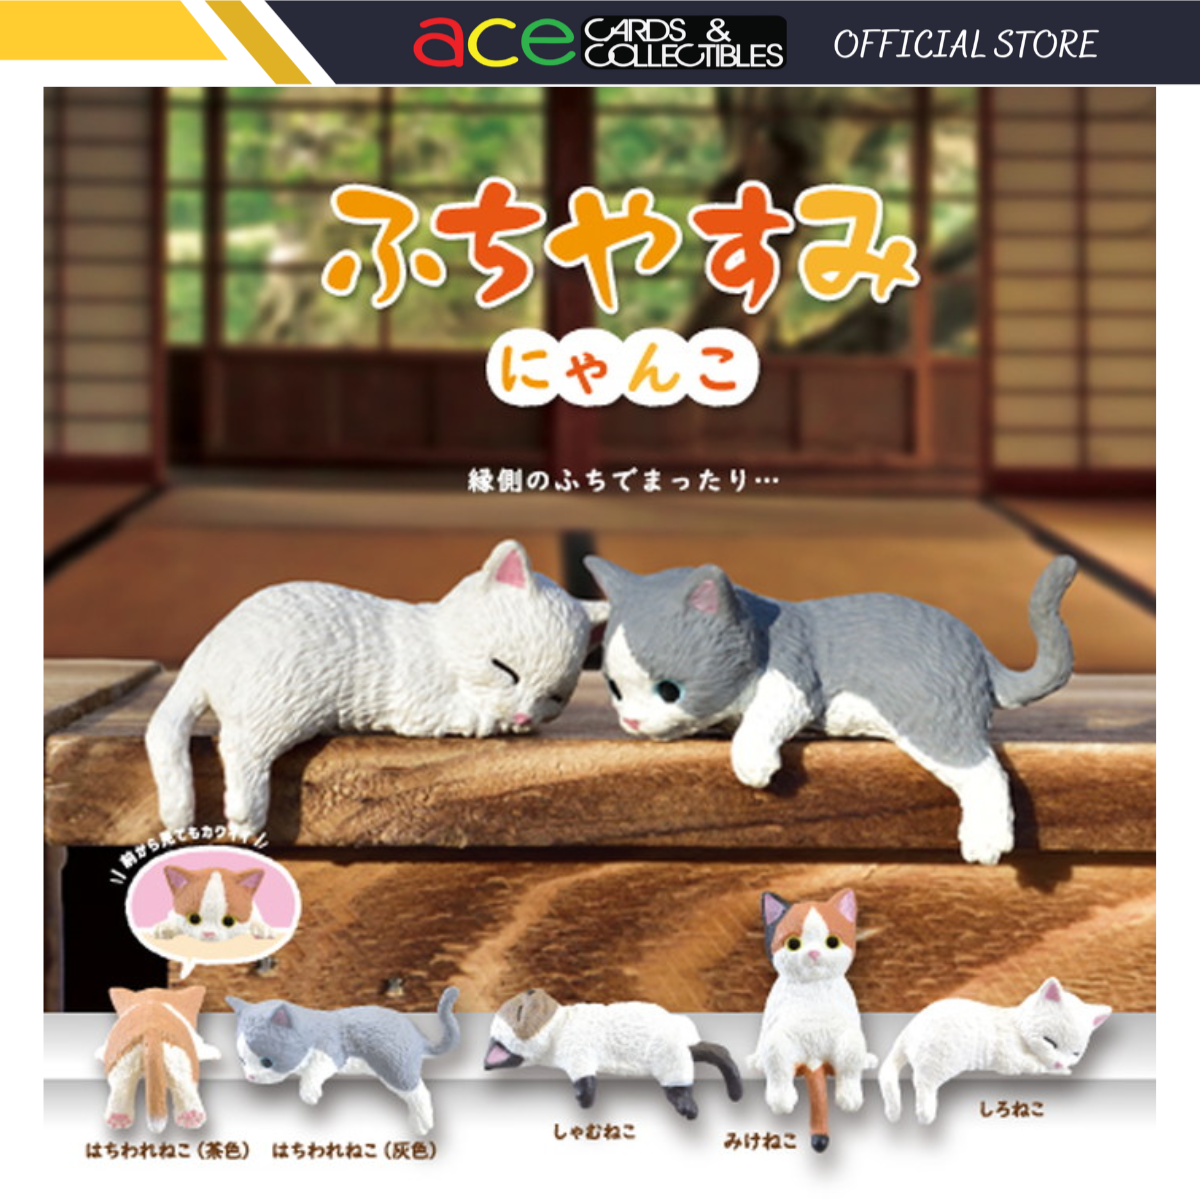 Yell x Edge Rest Cat Series-Display Box (10 pcs)-Yell-Ace Cards & Collectibles